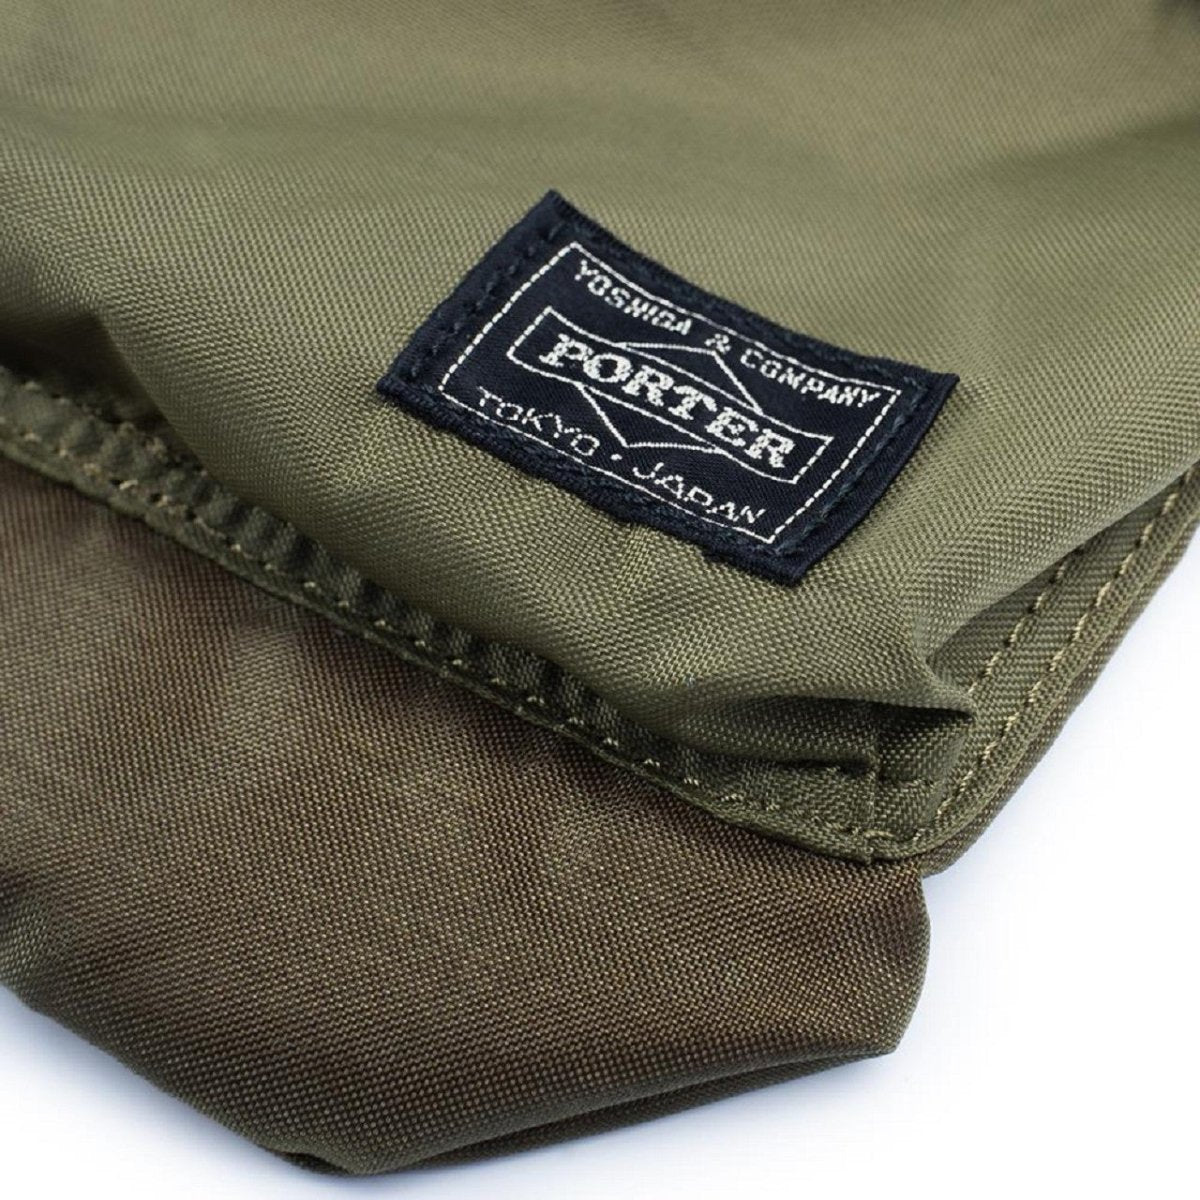 Porter by Yoshida Force Series Shoulder Pouch (Olive)  - Allike Store